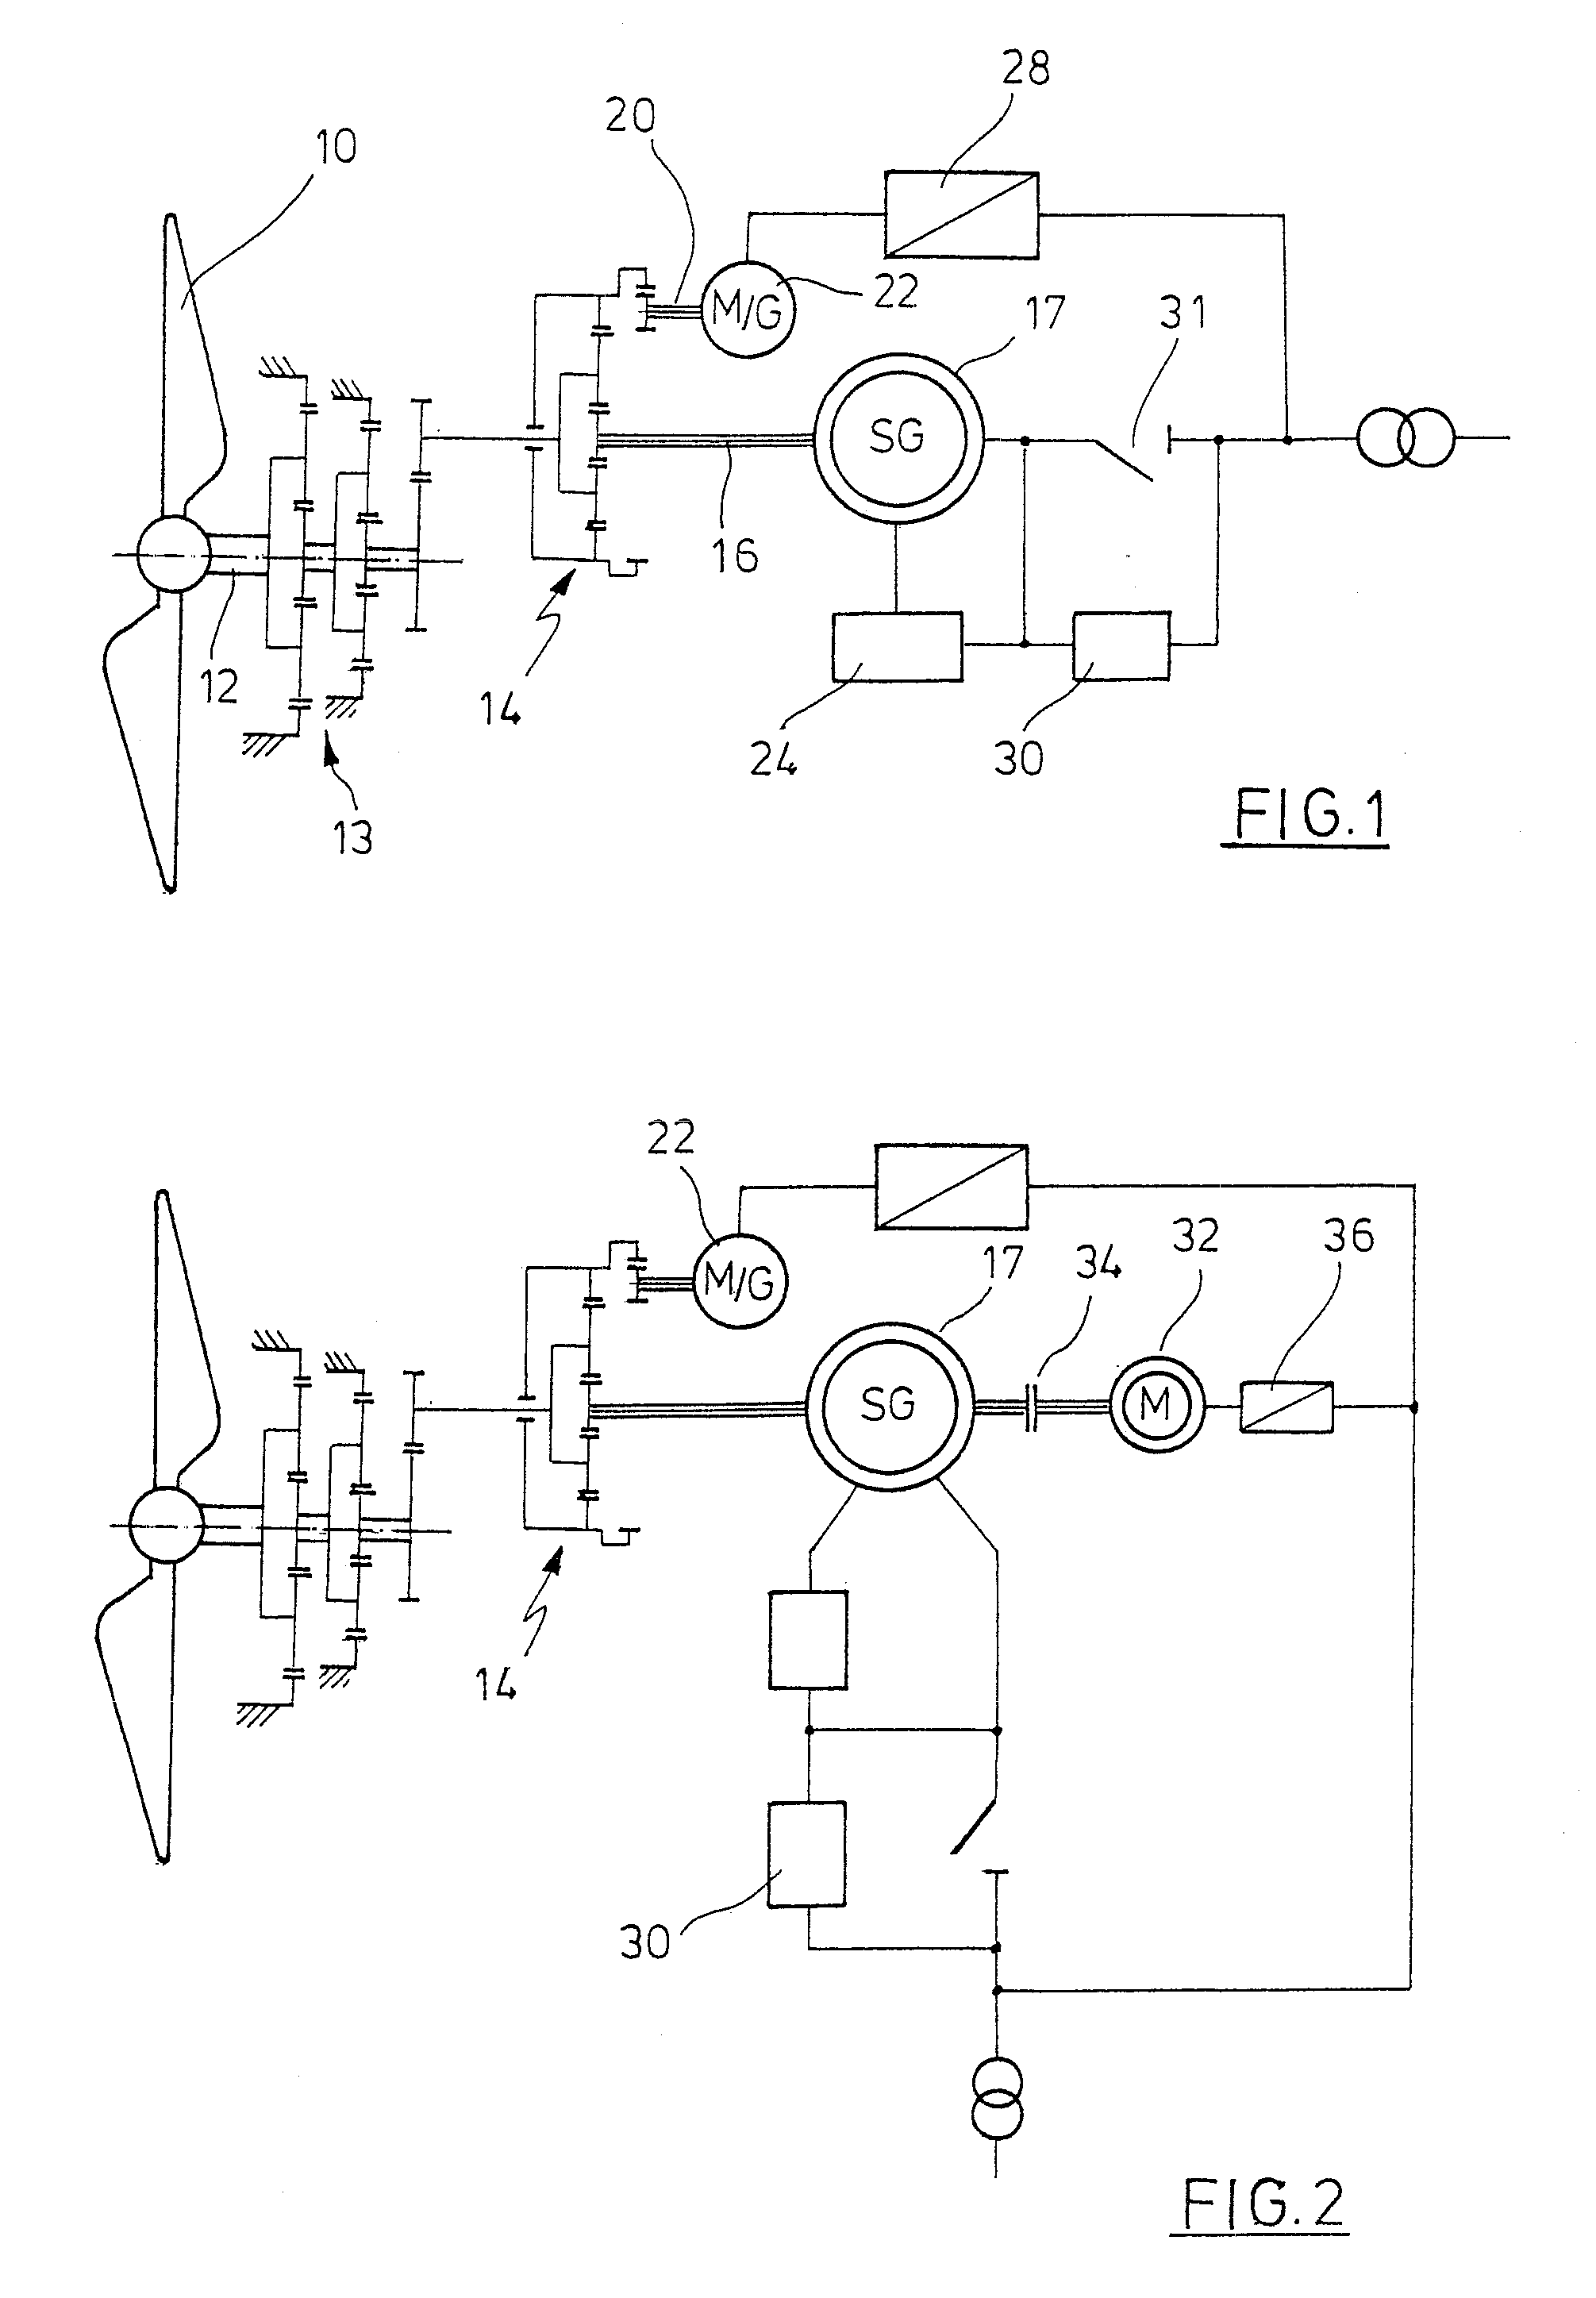 Method for the operation of a wind energy plant with a synchronous generator and a superimposition gearbox